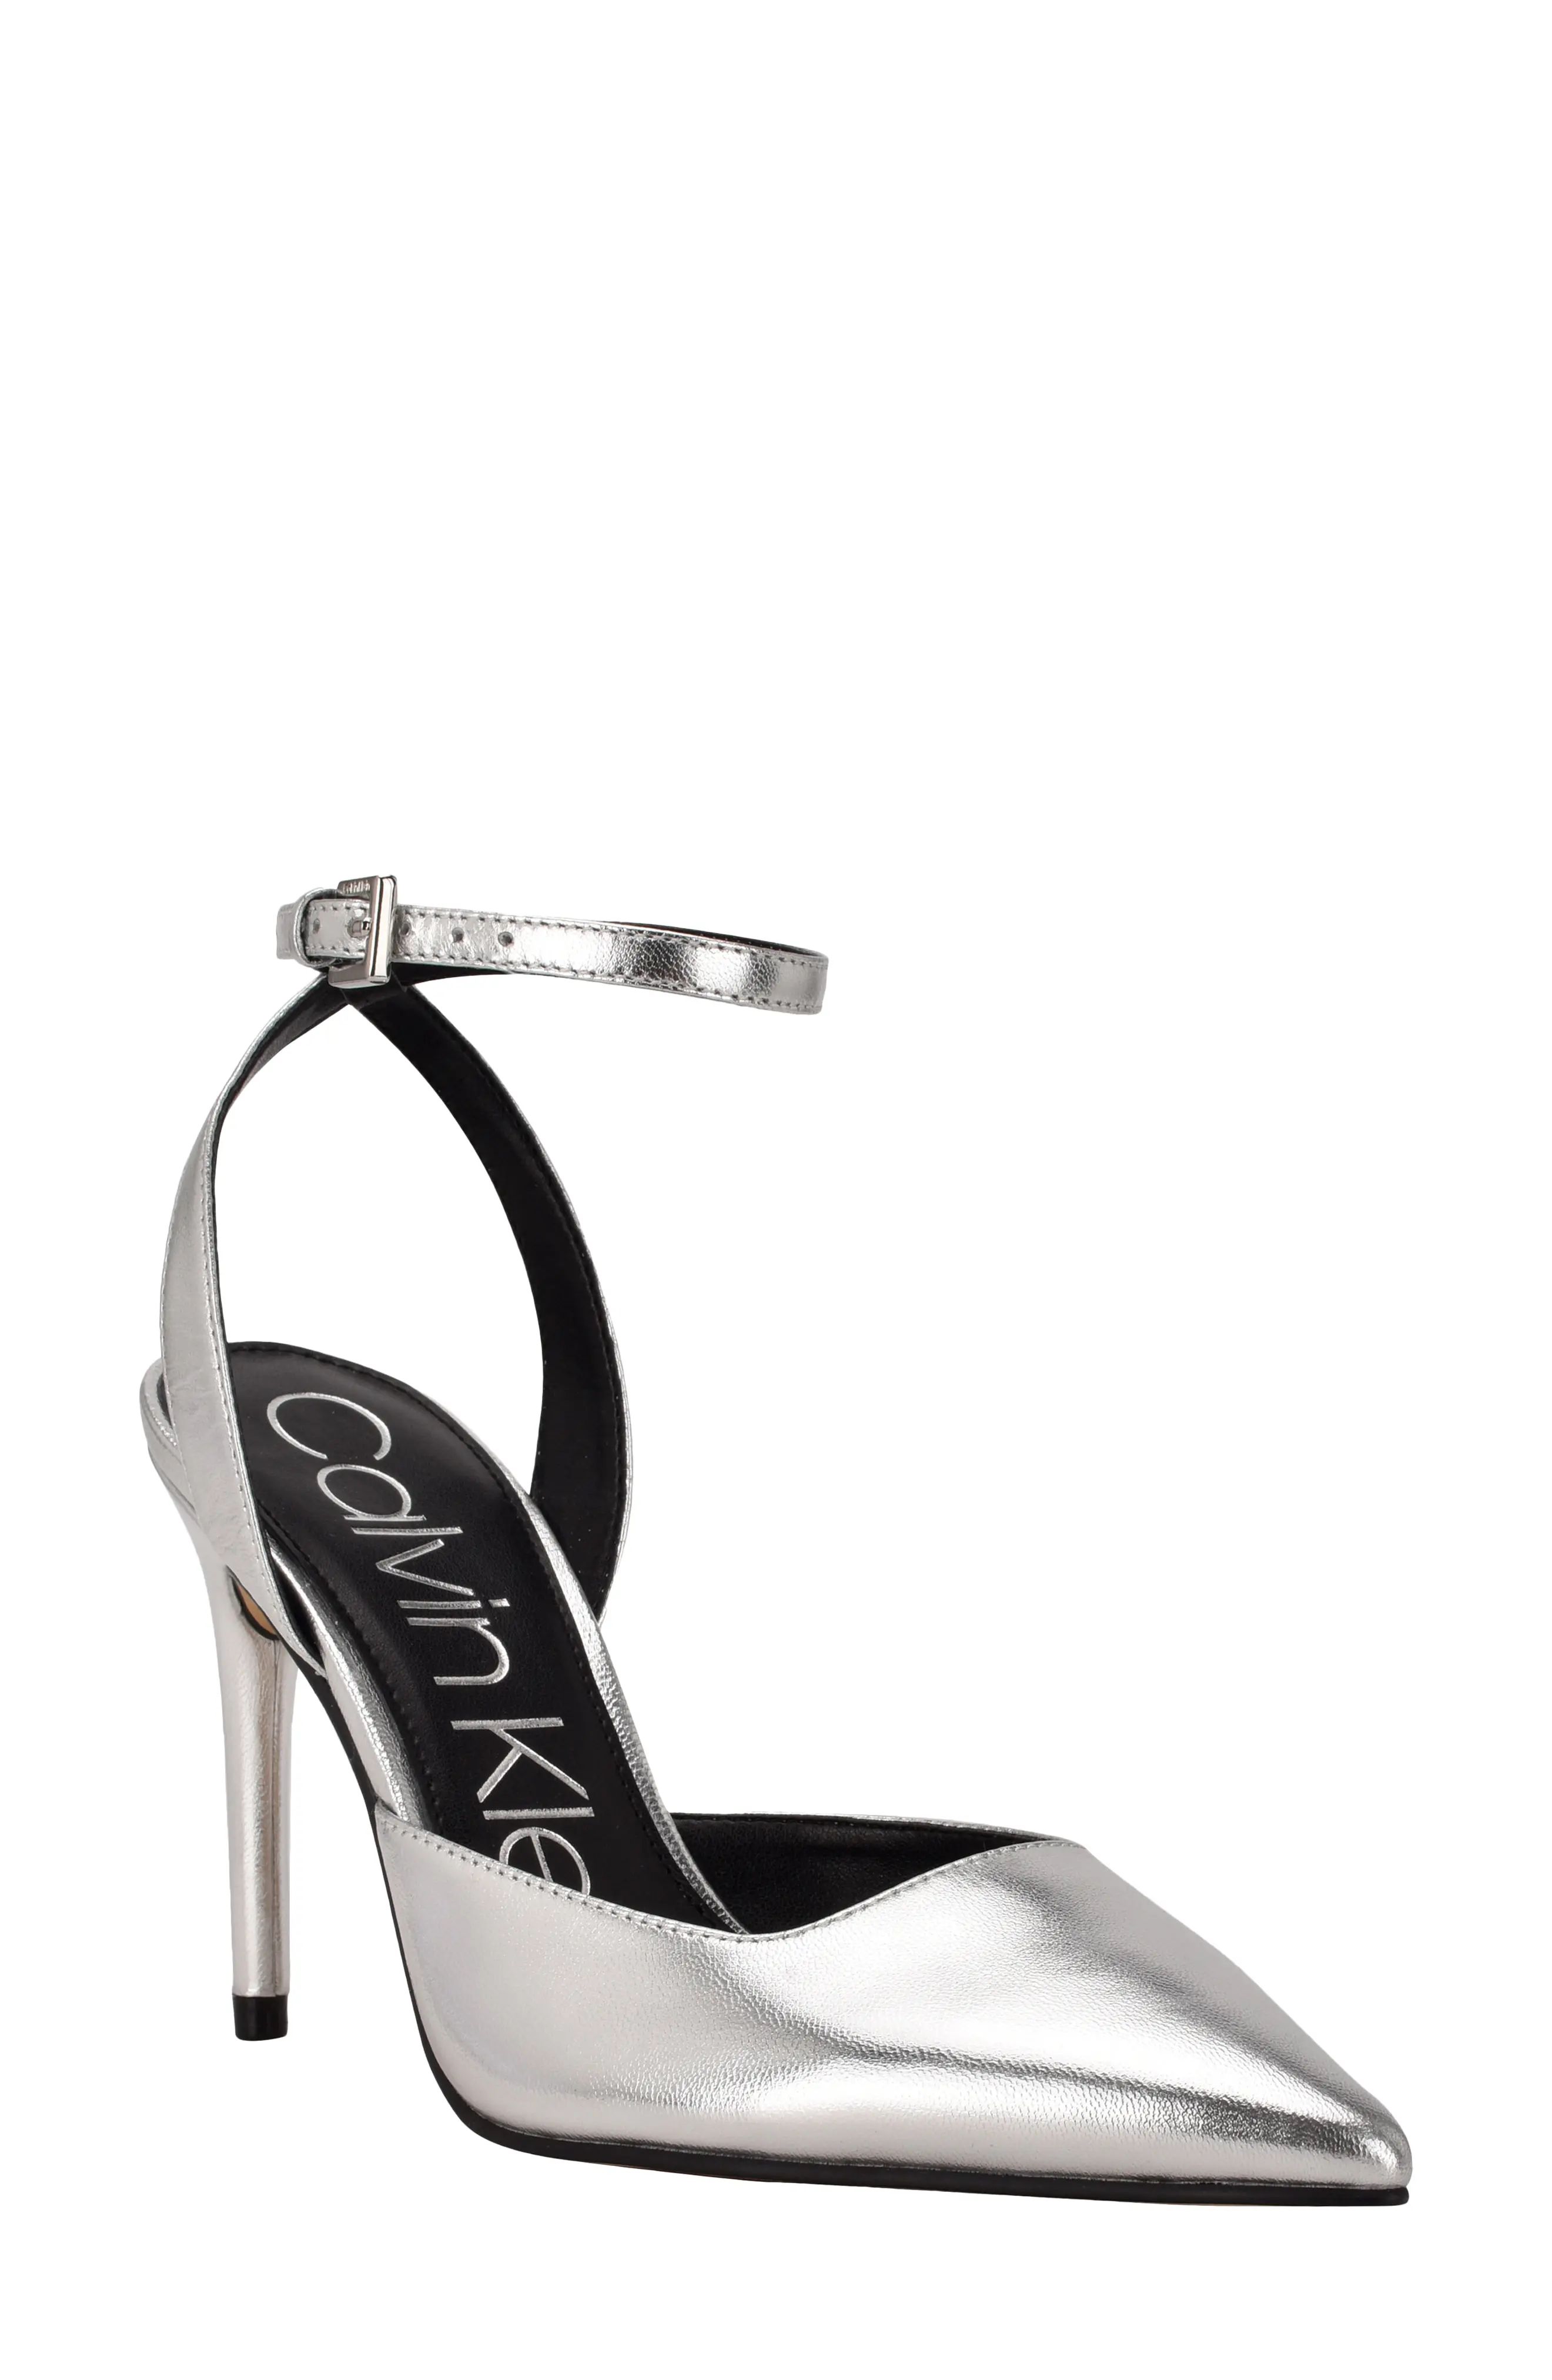 Calvin Klein Dona Pointed Toe Pump, Size 7 in Silver 040 at Nordstrom | Nordstrom